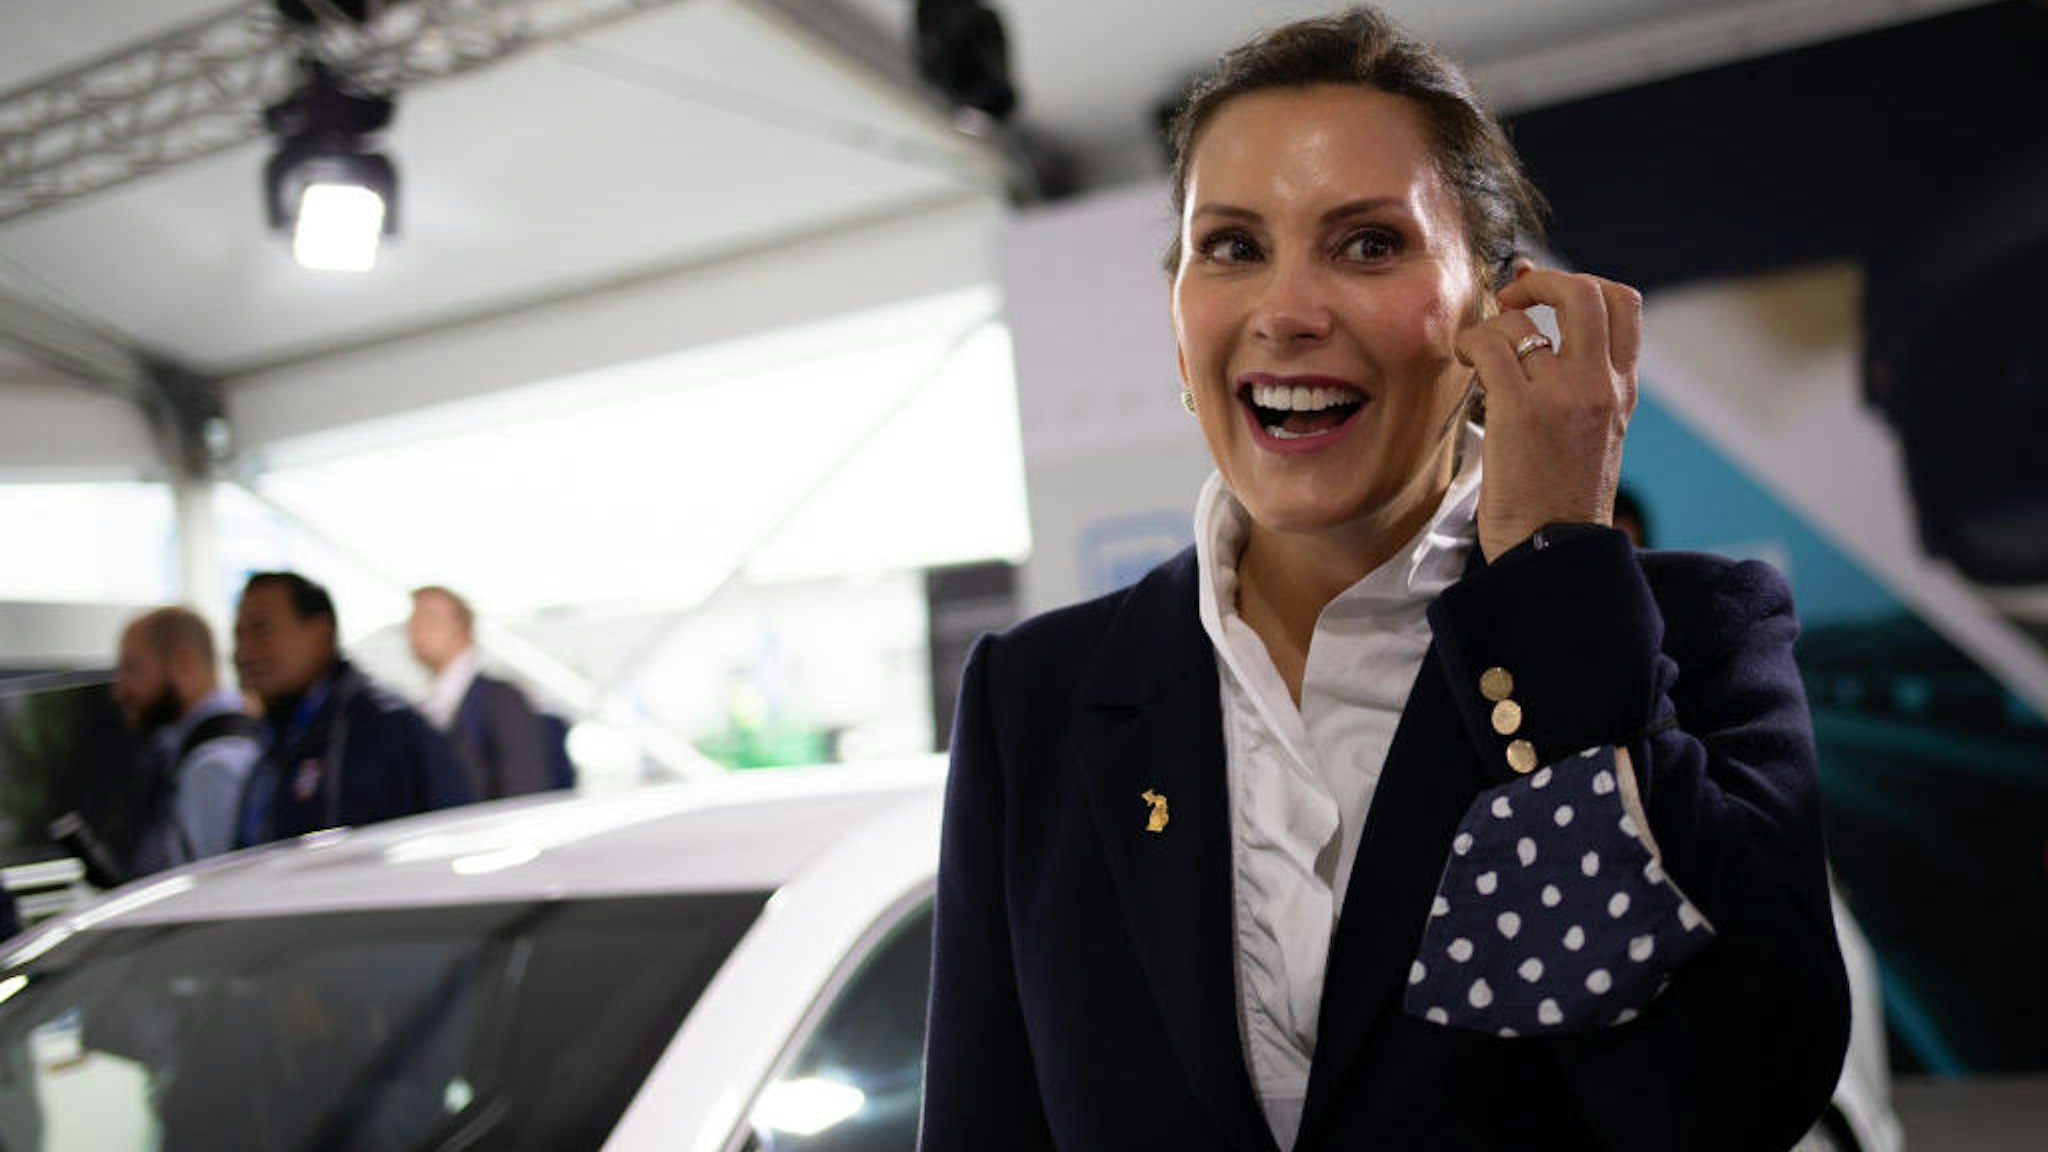 Gretchen Whitmer, governor of Michigan, during a tour of the Motor Bella Auto Show in Pontiac, Michigan, U.S., on Tuesday, Sept. 21, 2021. Motor Bella, a six-day experiential auto show, is making its debut at the M1 Concourse in Pontiac. Photographer: Emily Elconin/Bloomberg